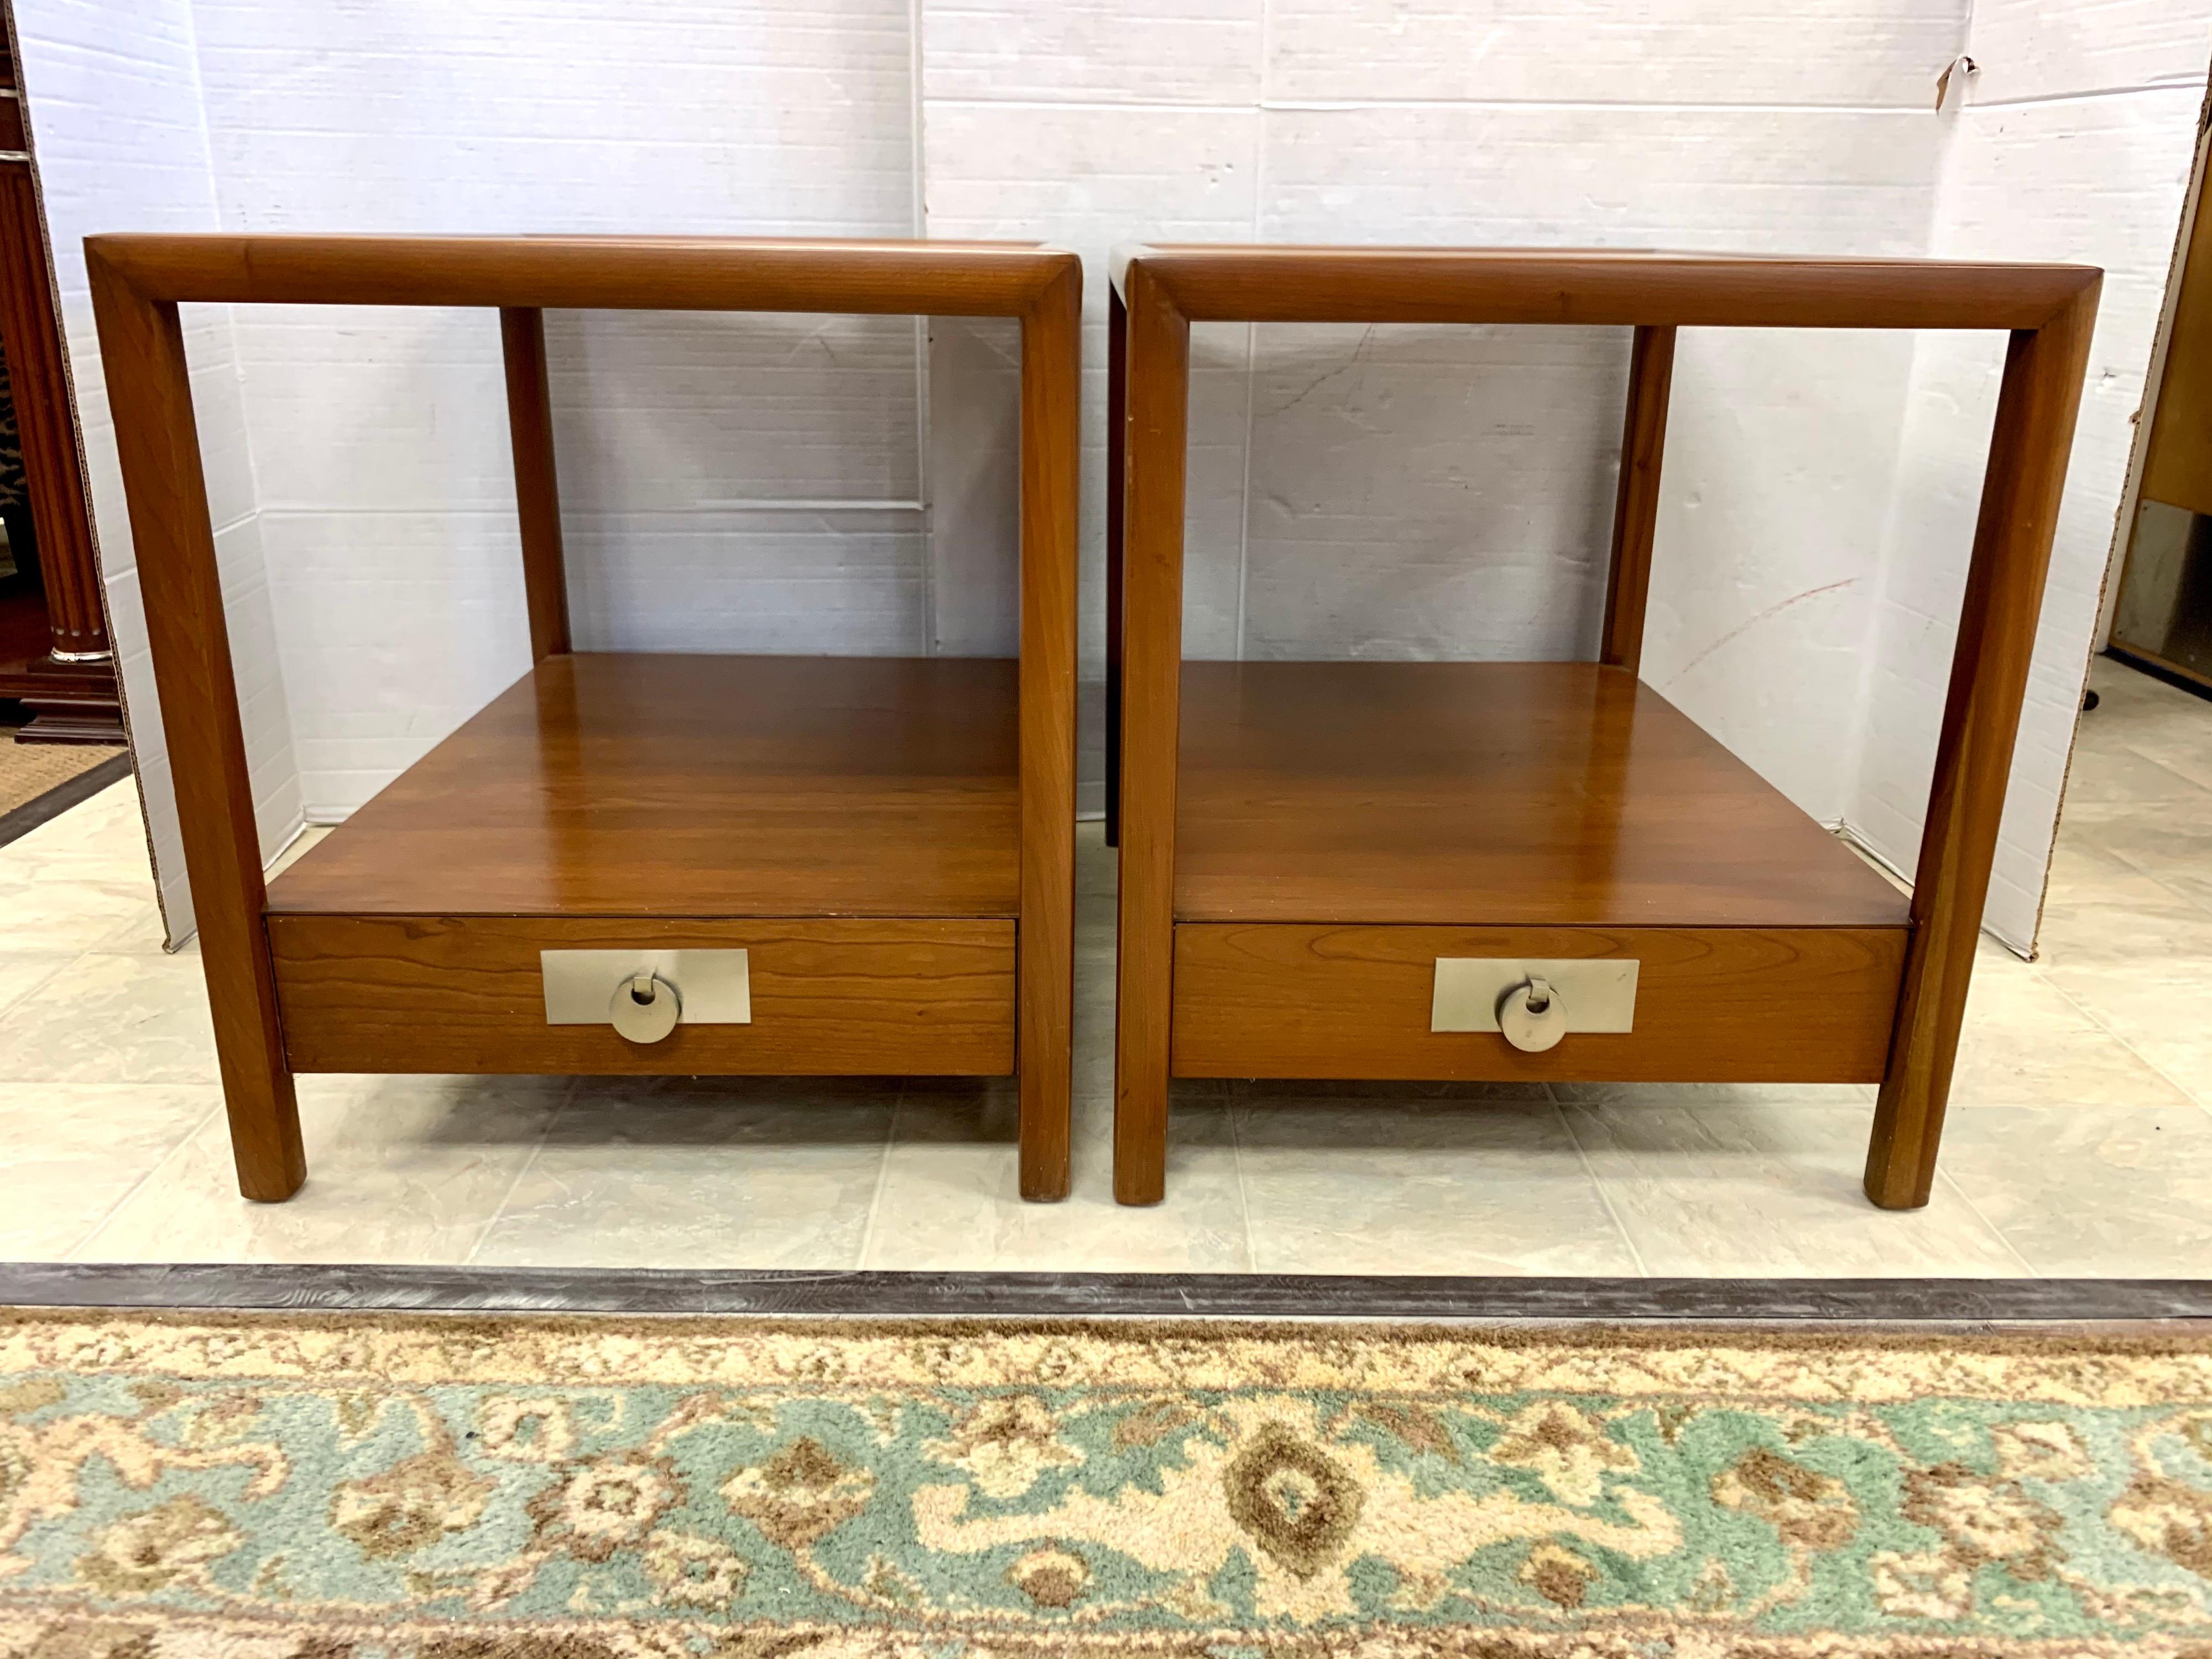 Rare matching pair of rectangular two tiered end tables by Michael Taylor for Baker Furniture’s iconic New World collection. All manufacturer hallmarks present. Price is for the pair, why pay $15,000.00 and up?